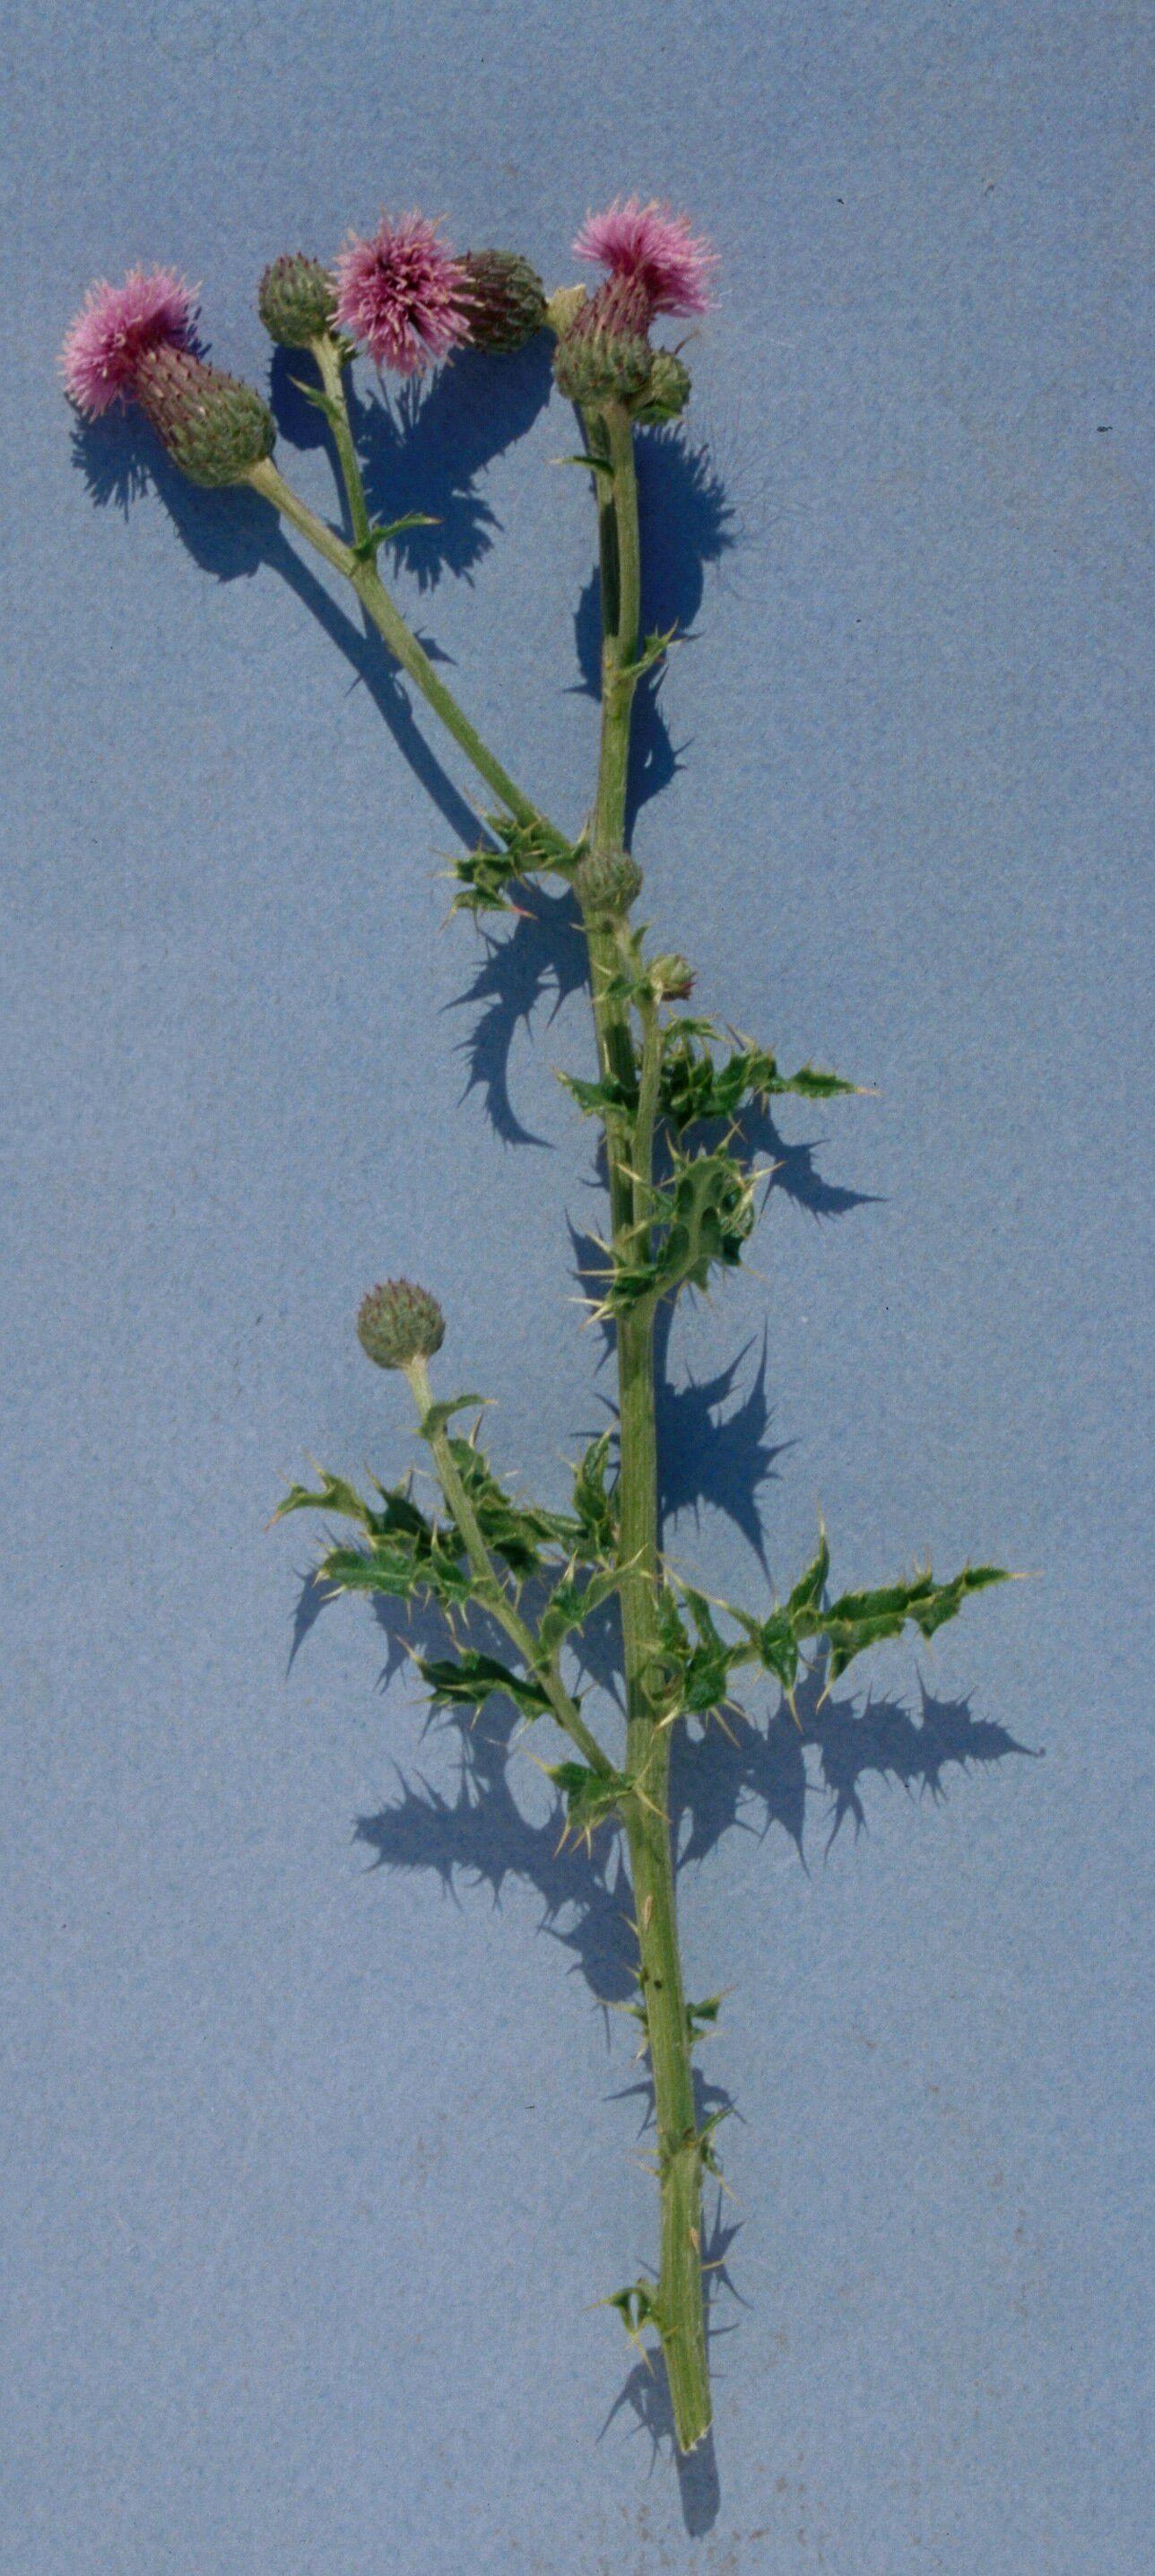 Canada thistle flowers. 